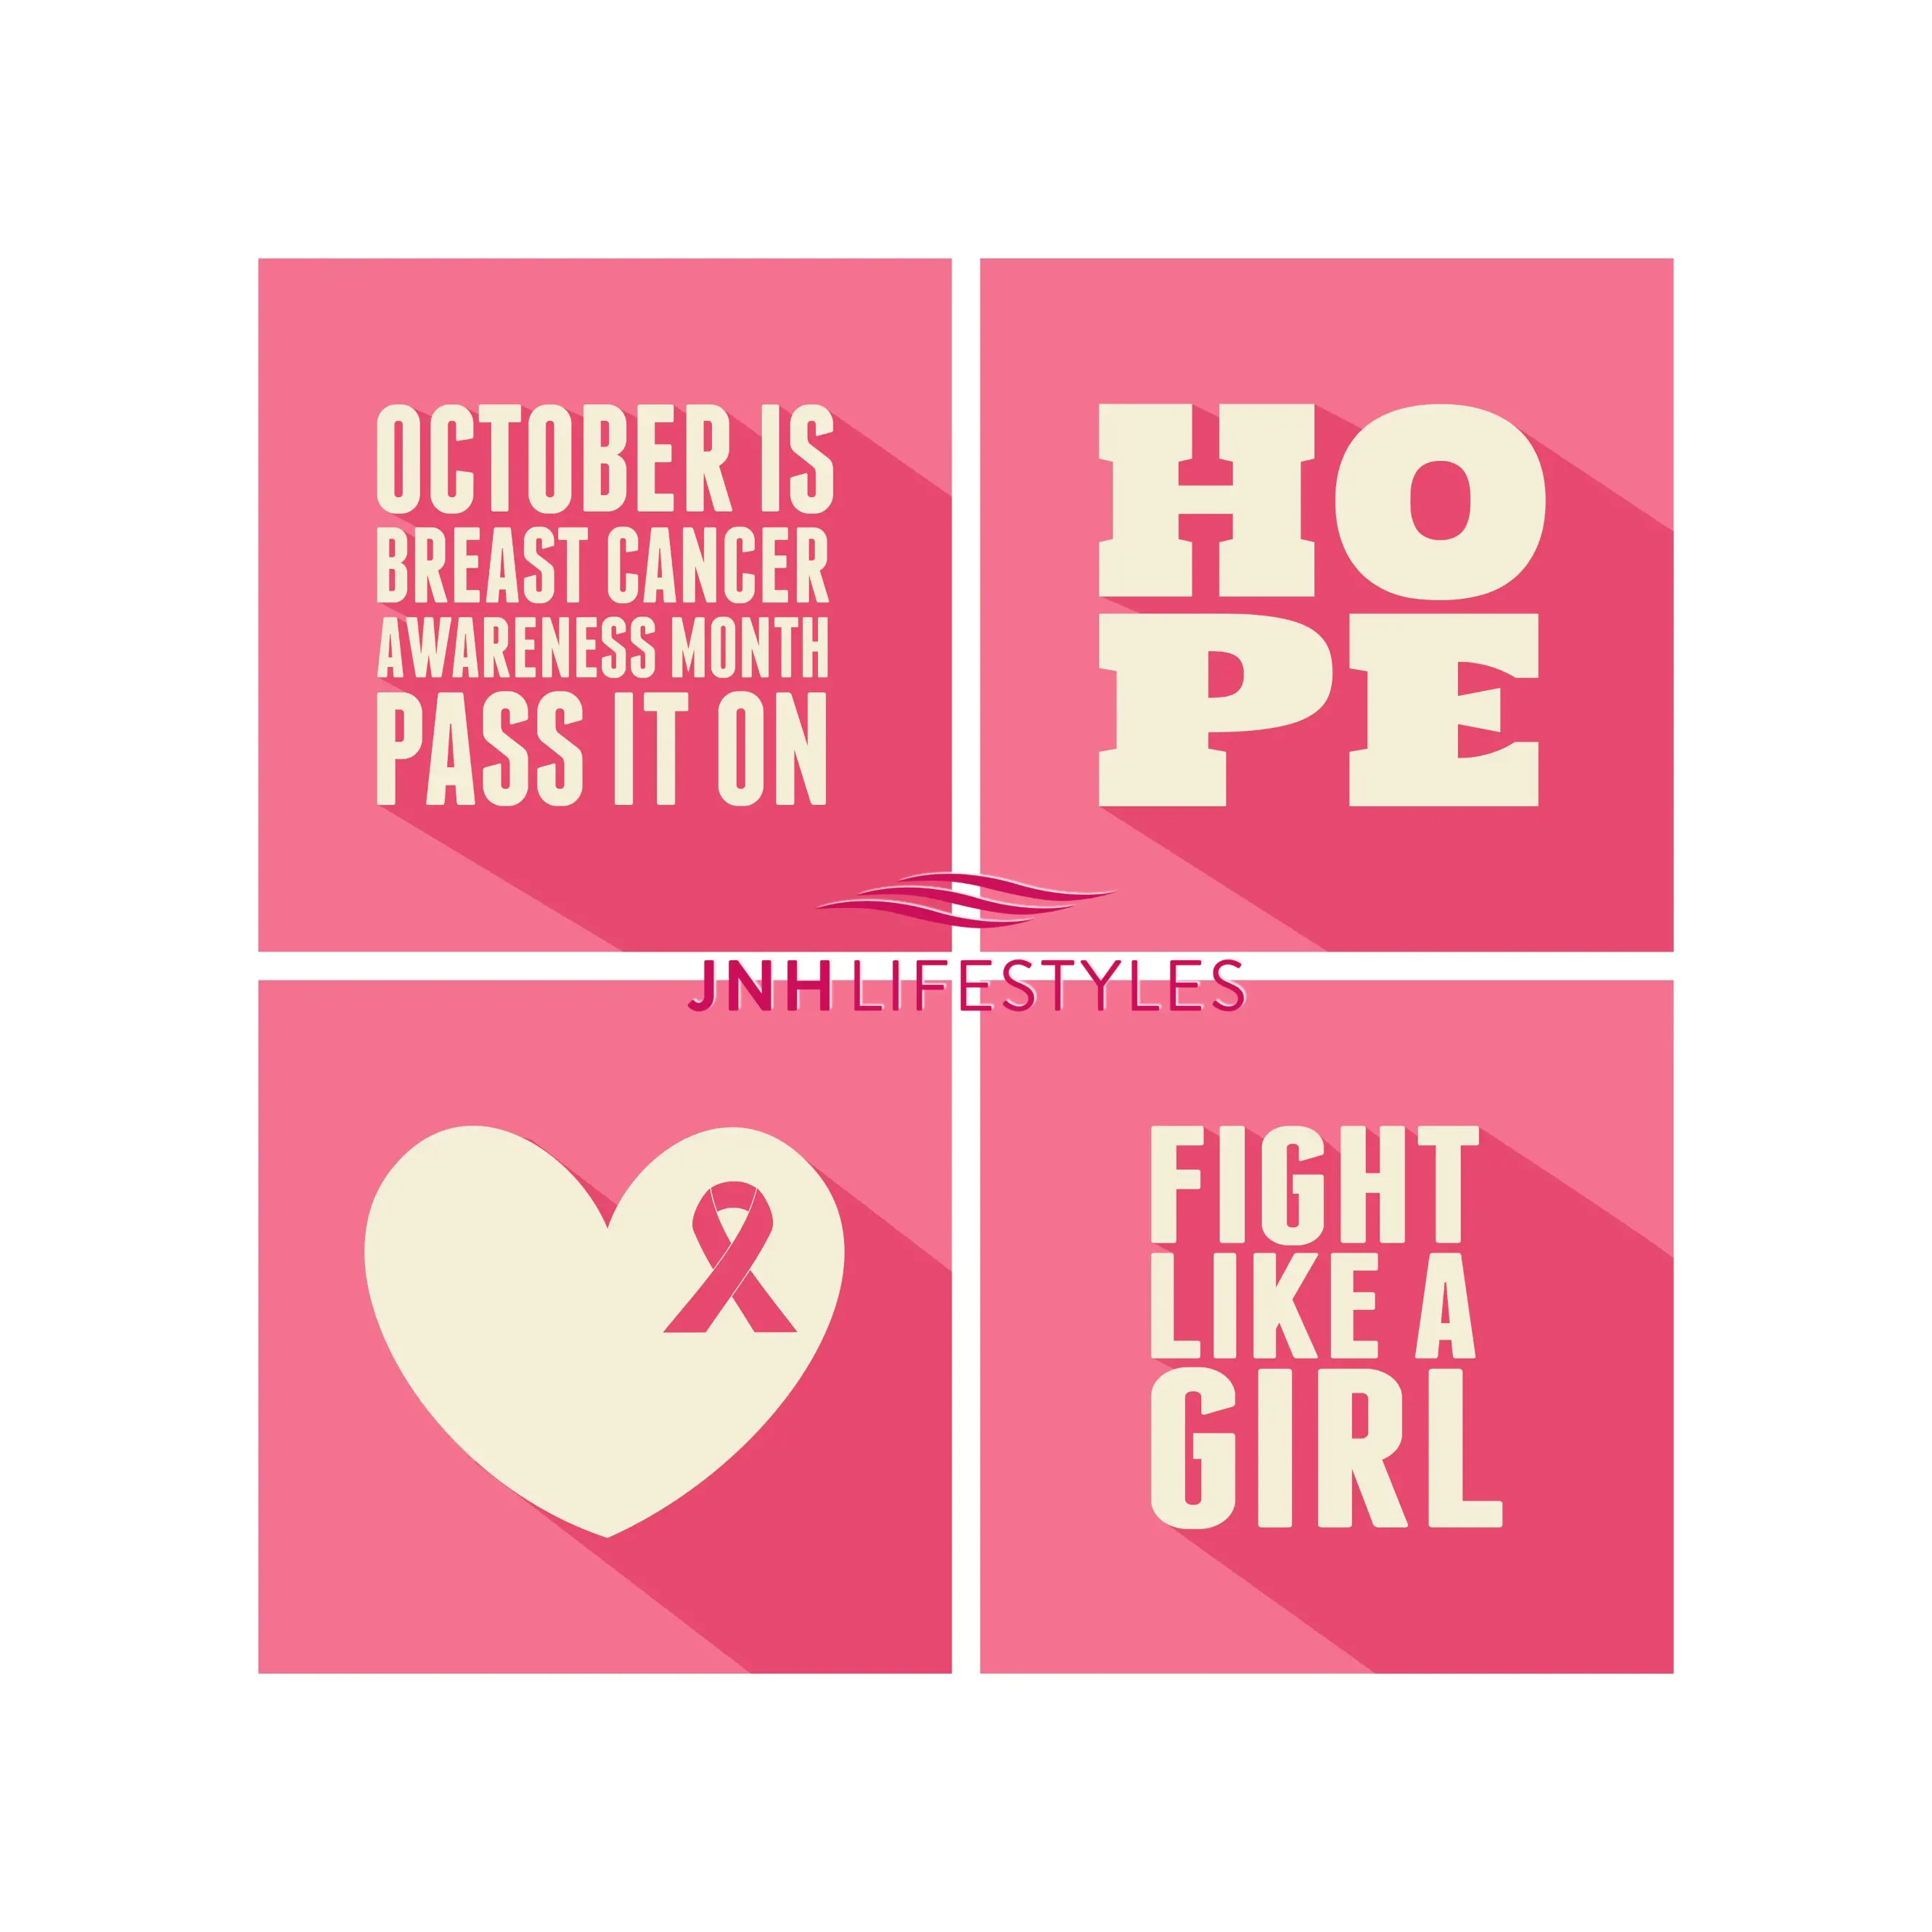 October is breast cancer awareness month, pass it on; Hope; fight like a girl; JNH Lifestyles